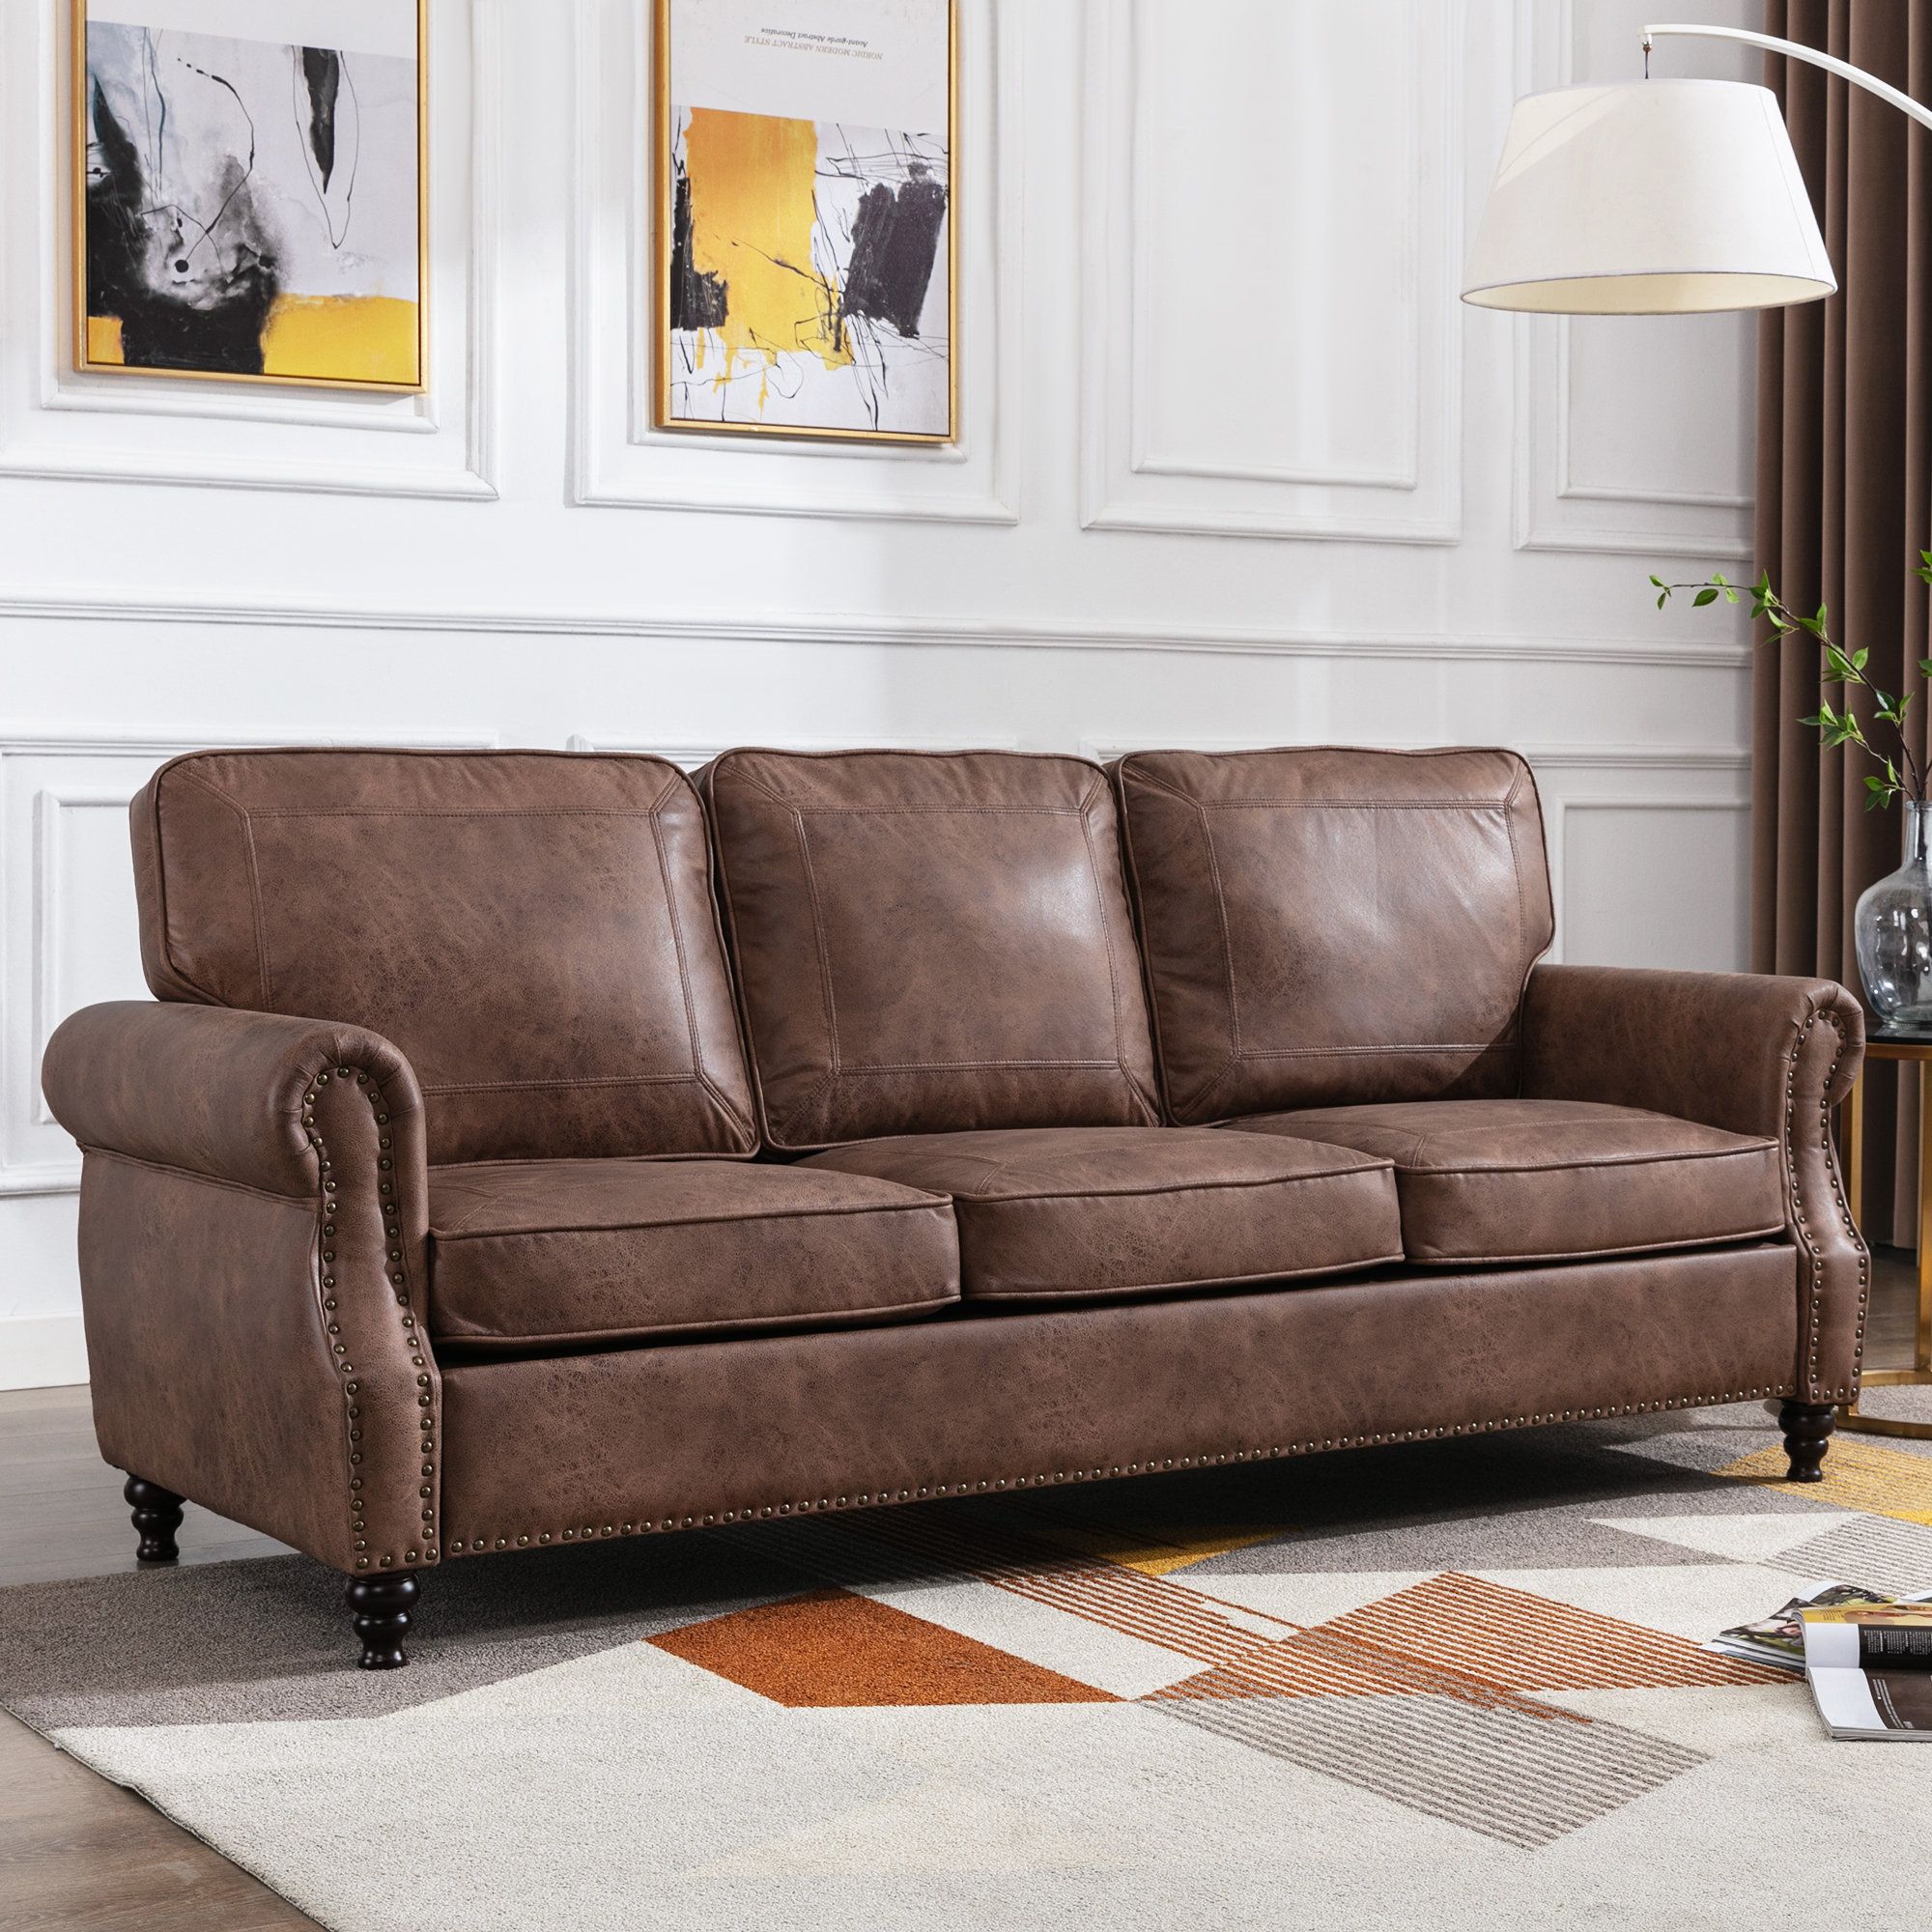 Lark Manor Amarius 80" Wide Faux Leather Rolled Arm Sofa & Reviews | Wayfair Pertaining To Faux Leather Sofas (View 8 of 15)